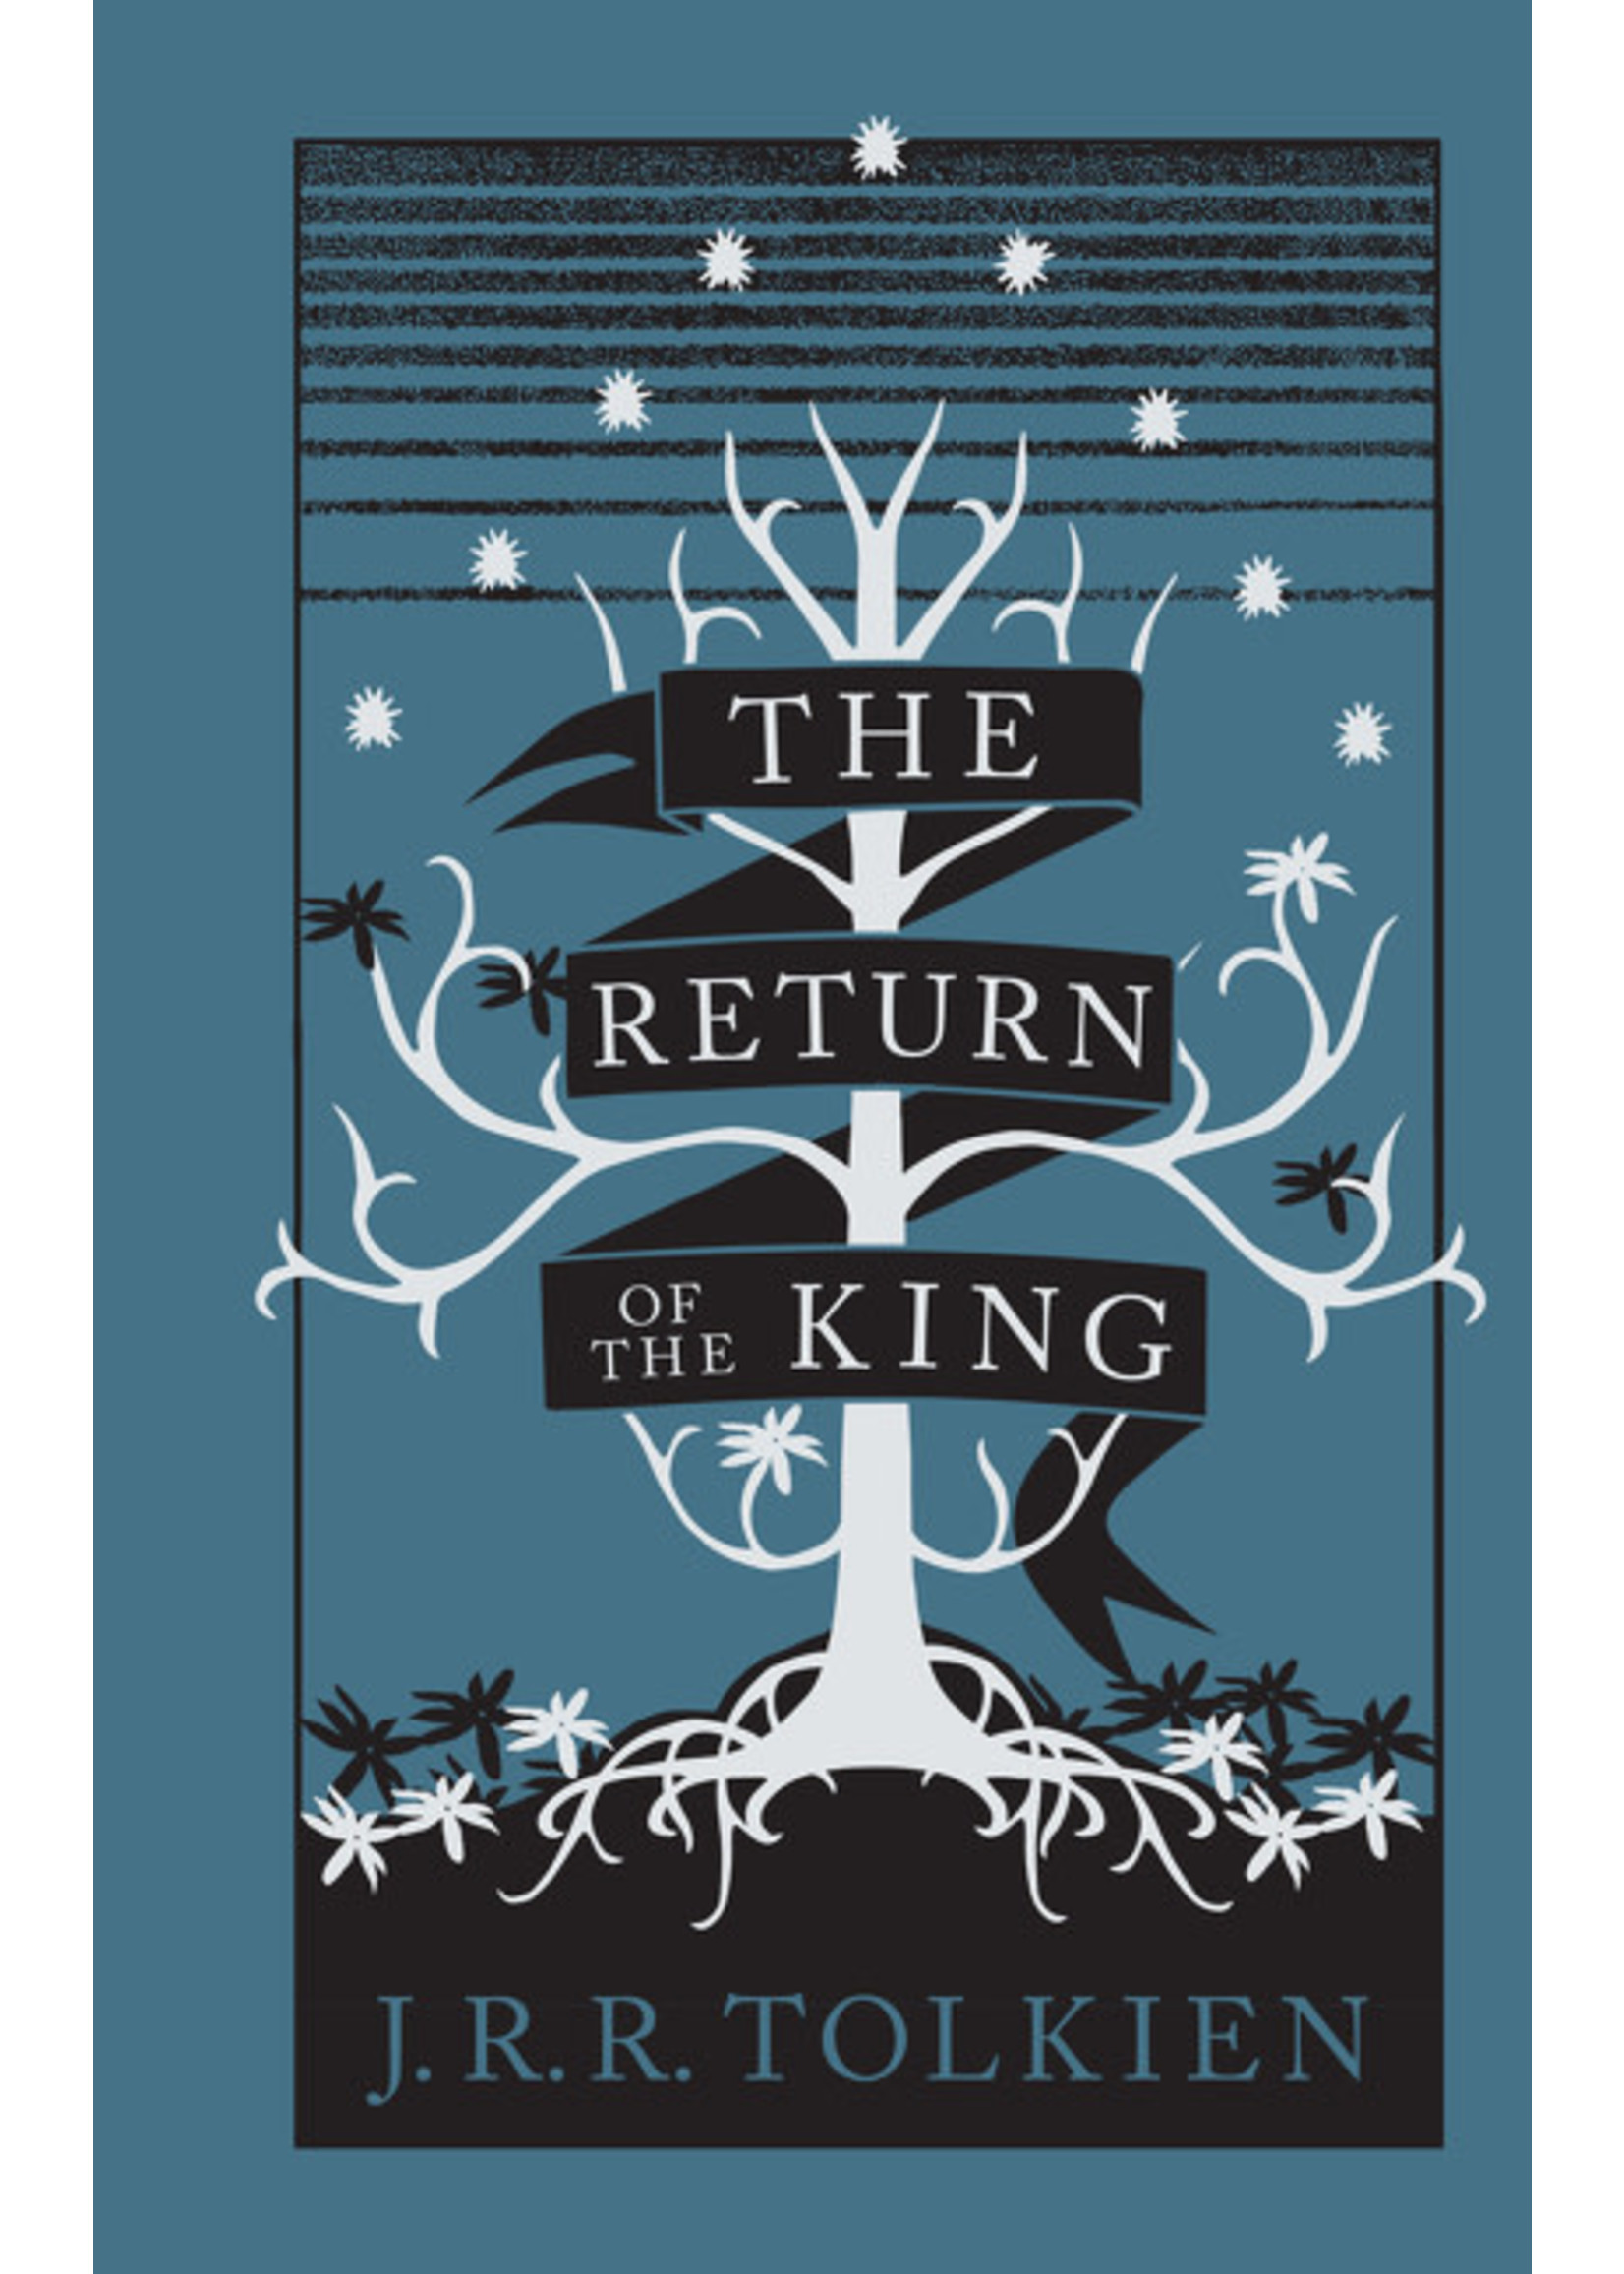 Return of the King (The Lord of the Rings #3) by J. R. R. Tolkien